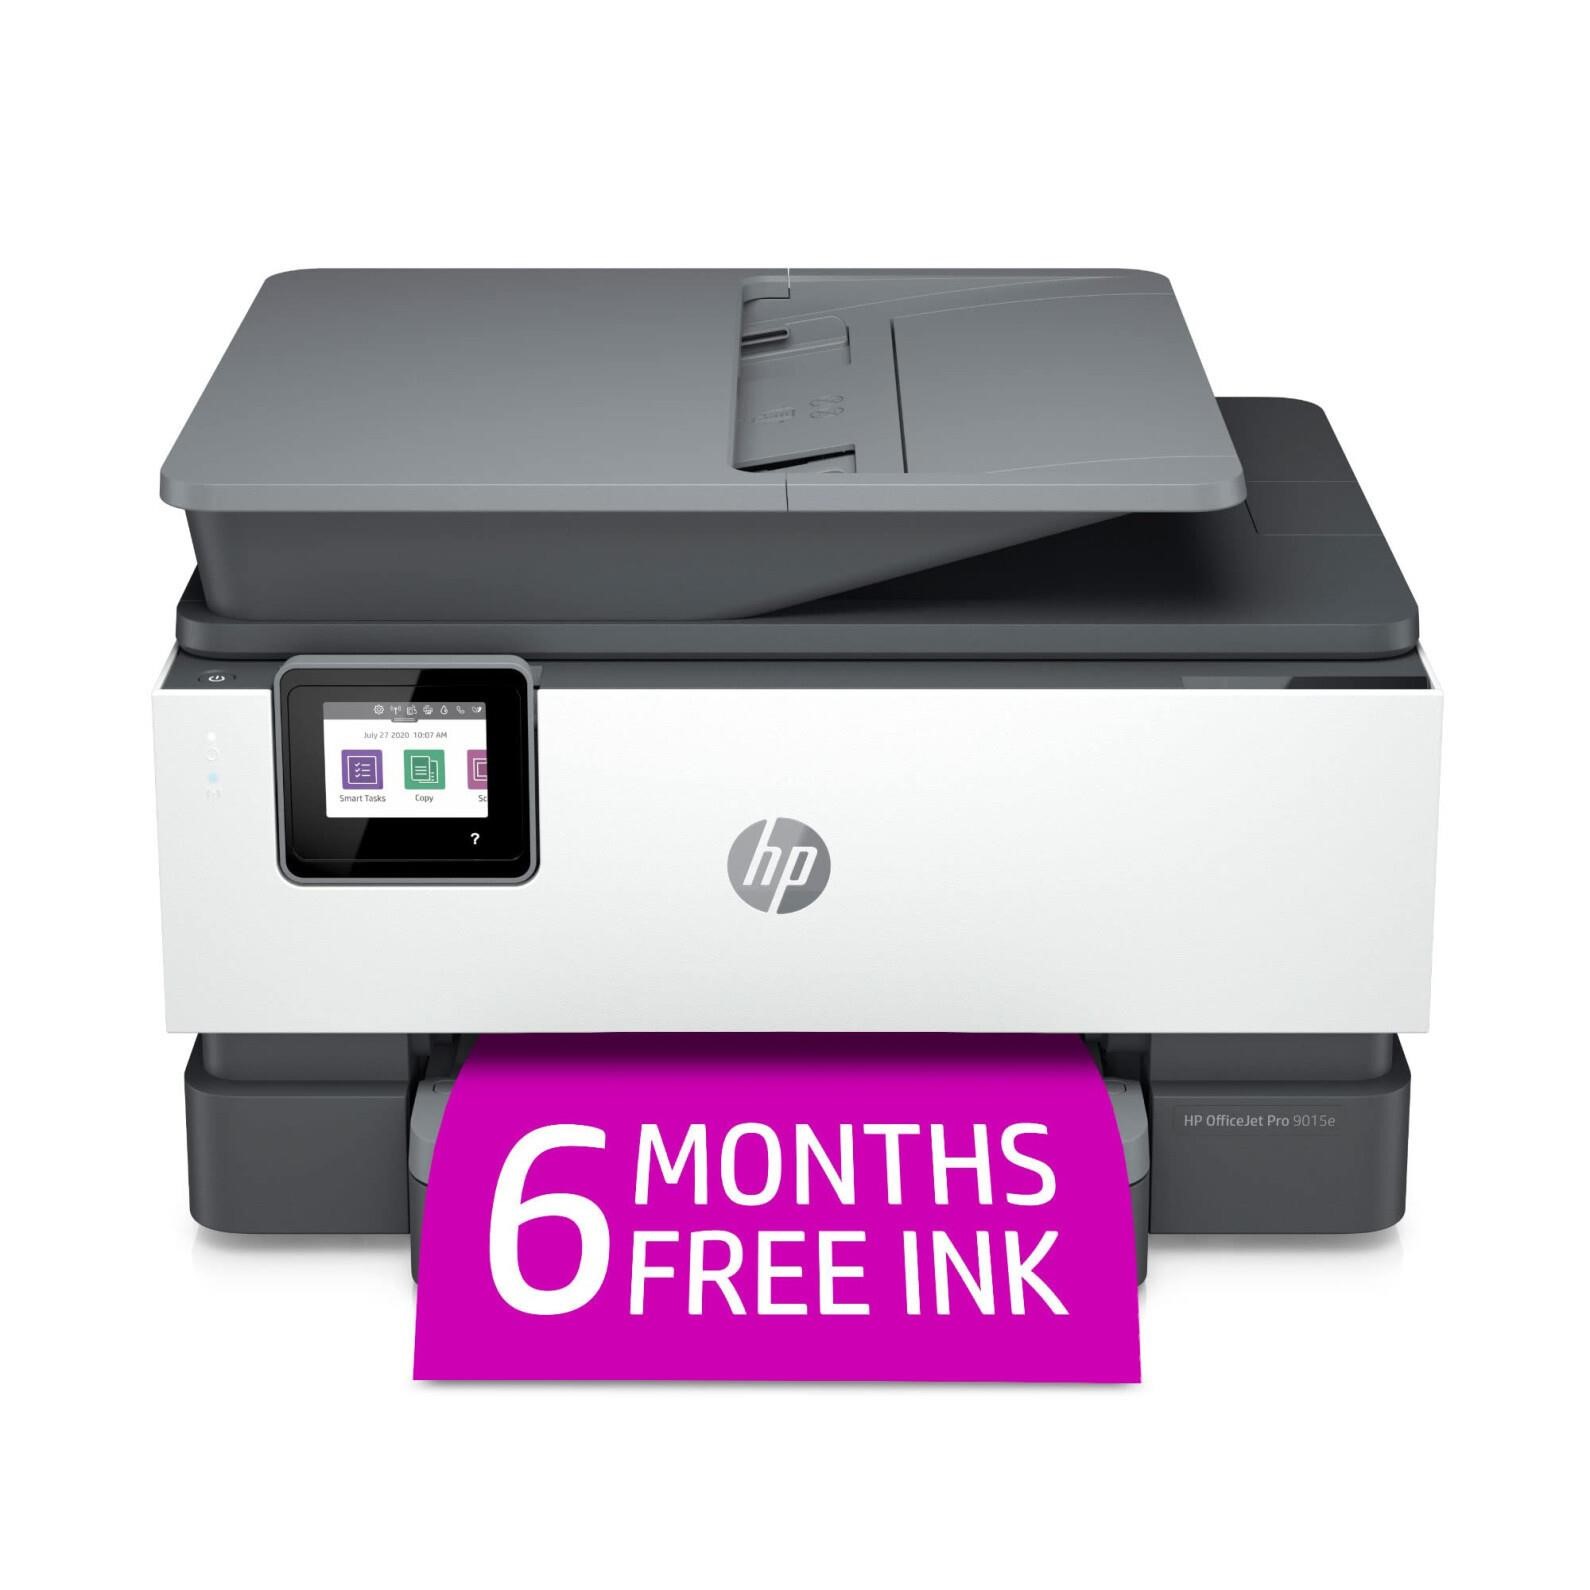 HP OfficeJet Pro 9015e Wireless Color All-in-One P